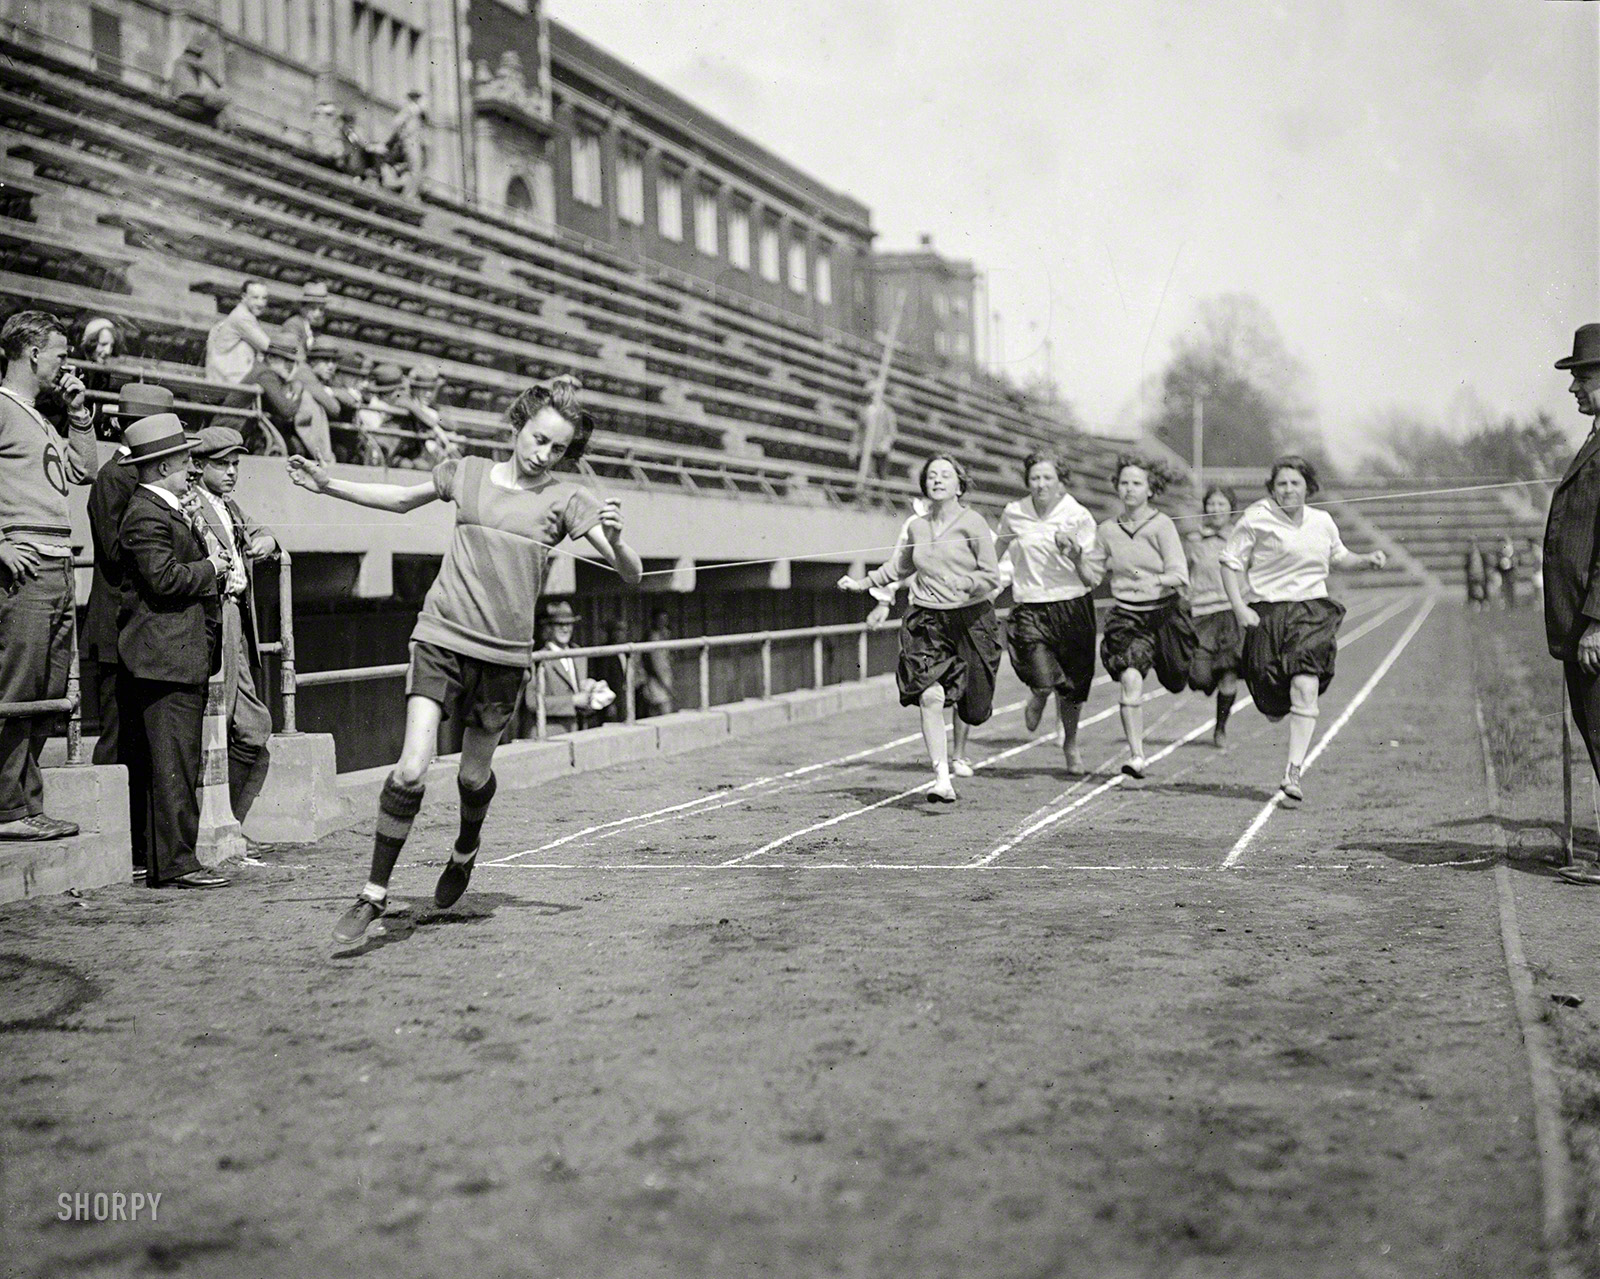 April 18, 1925. Washington, D.C. "Geo. Washington High inter class track meet at Central High." Skinny Shorts trounces Billowing Bloomers. View full size.